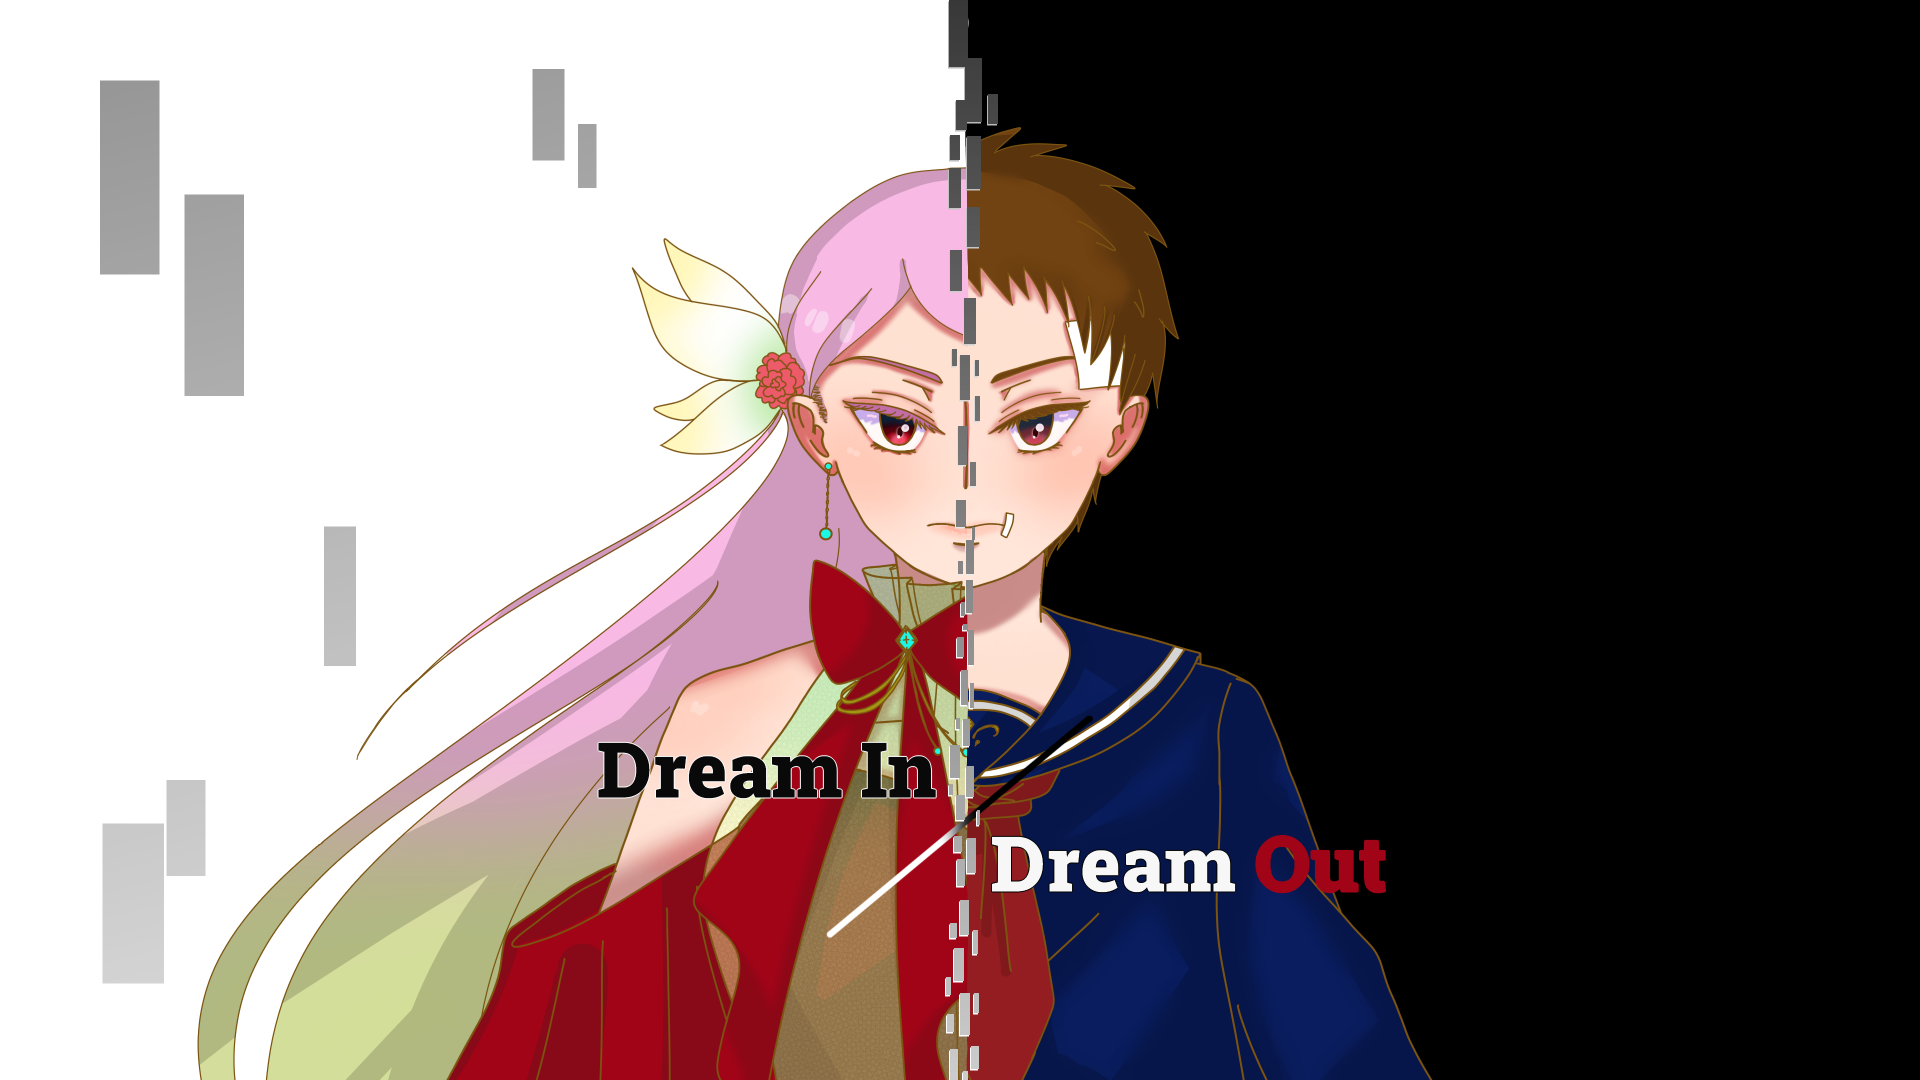 Dream In/Dream Out Chapter 1